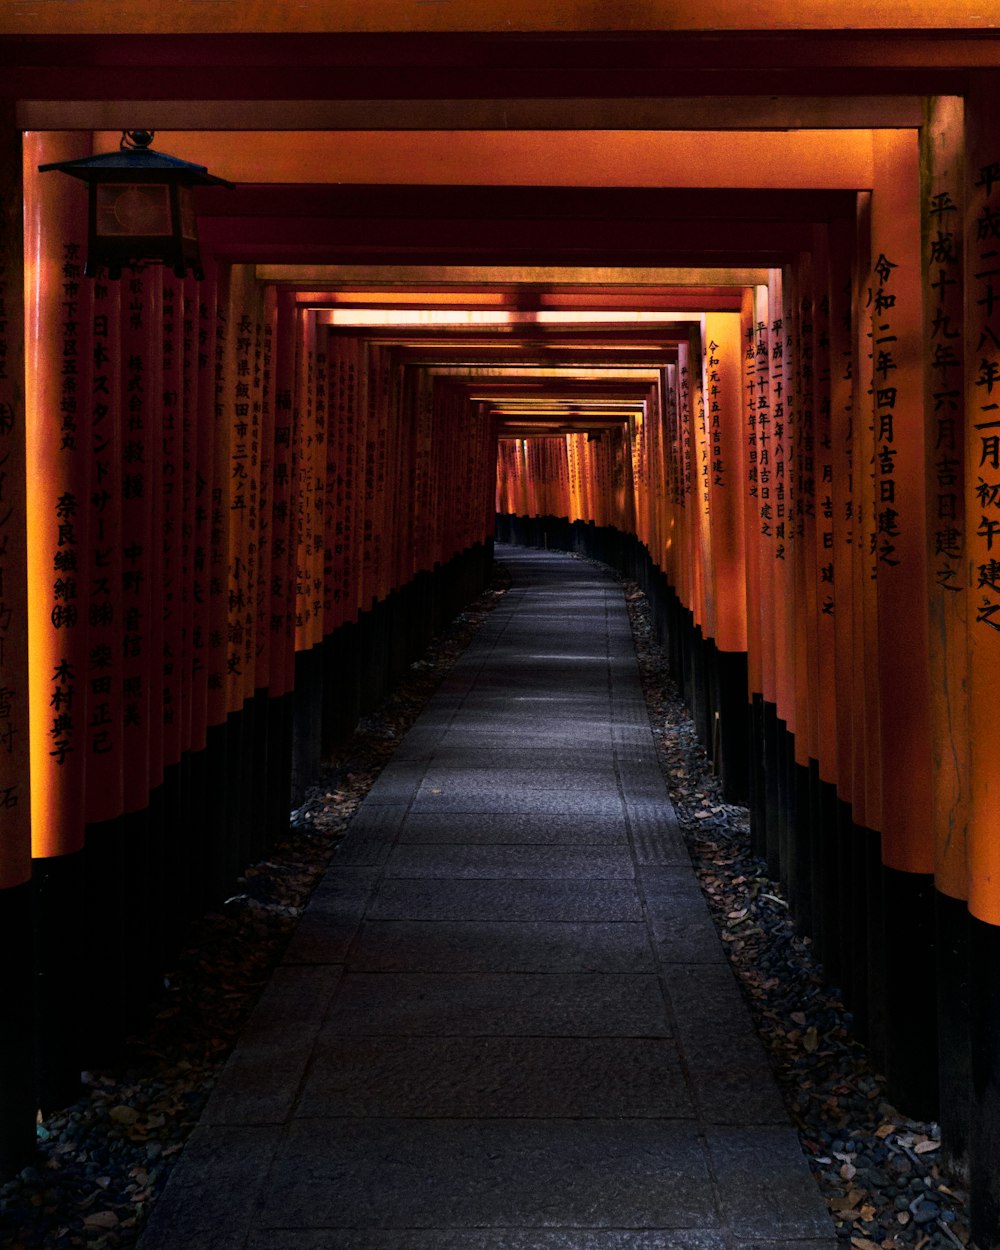 a tunnel of red and orange lanterns with asian writing on them